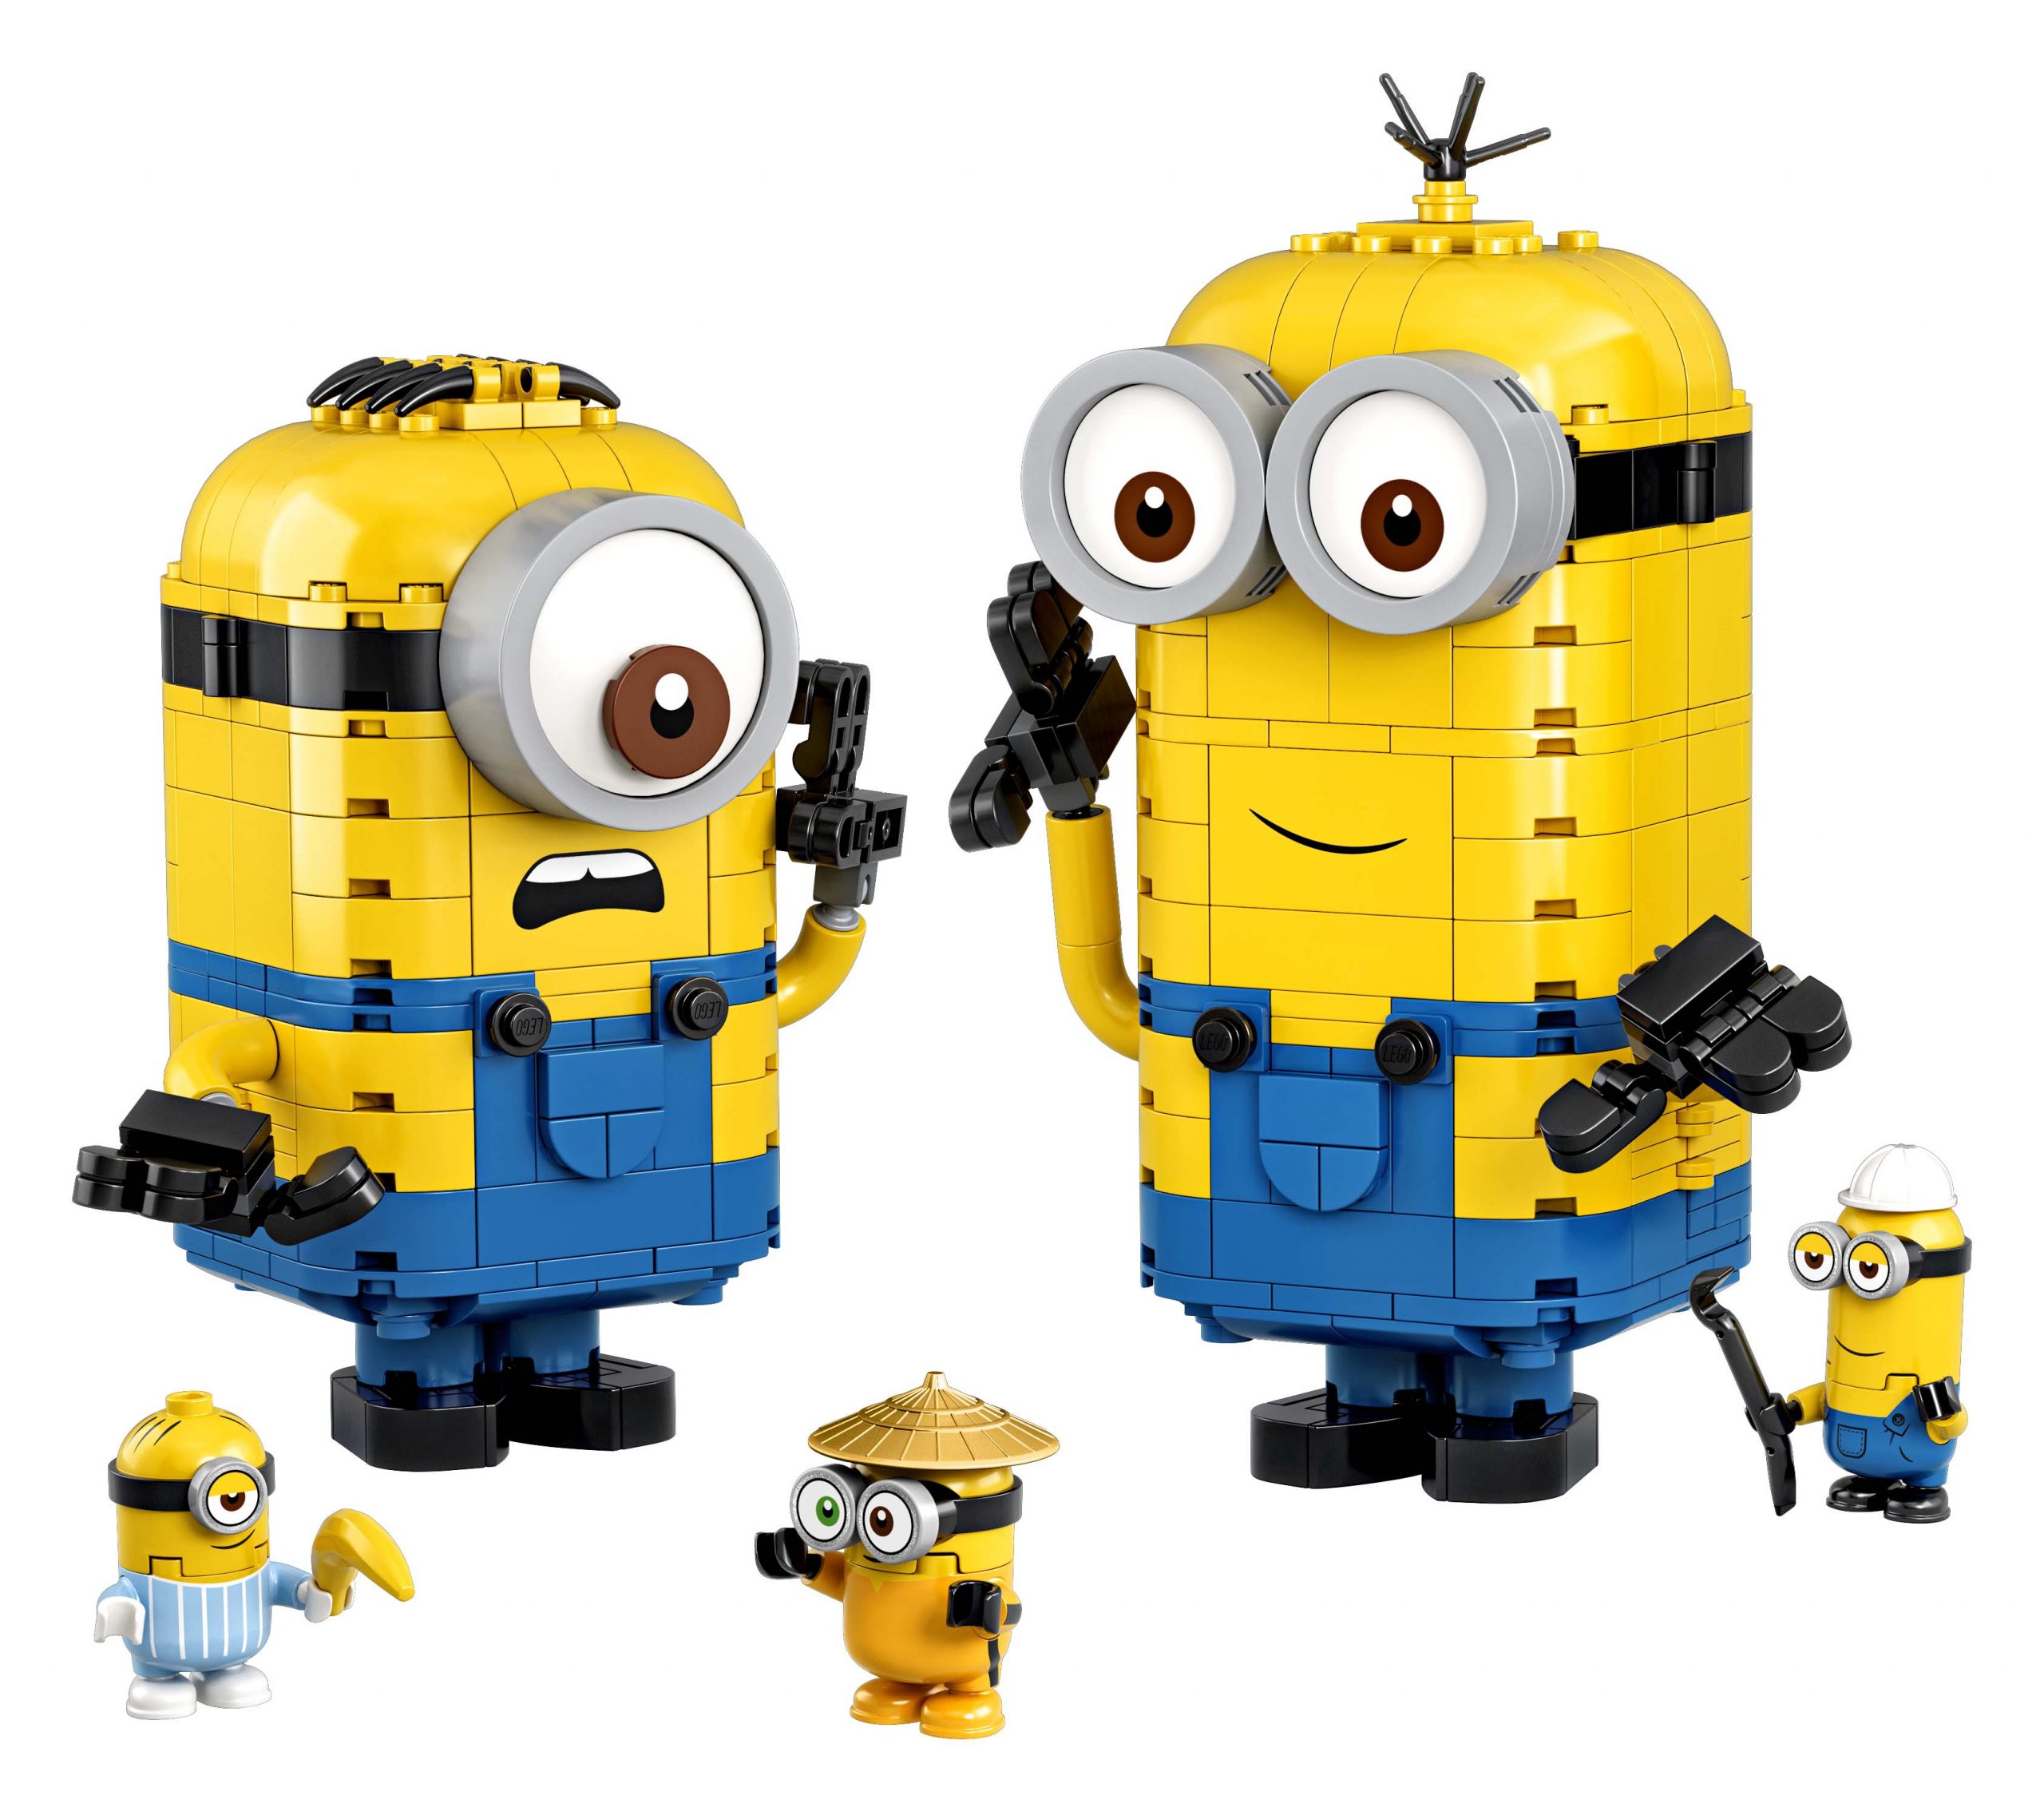 Lego Minions The Rise Of Gru Sets Officially Announced The Brick Fan